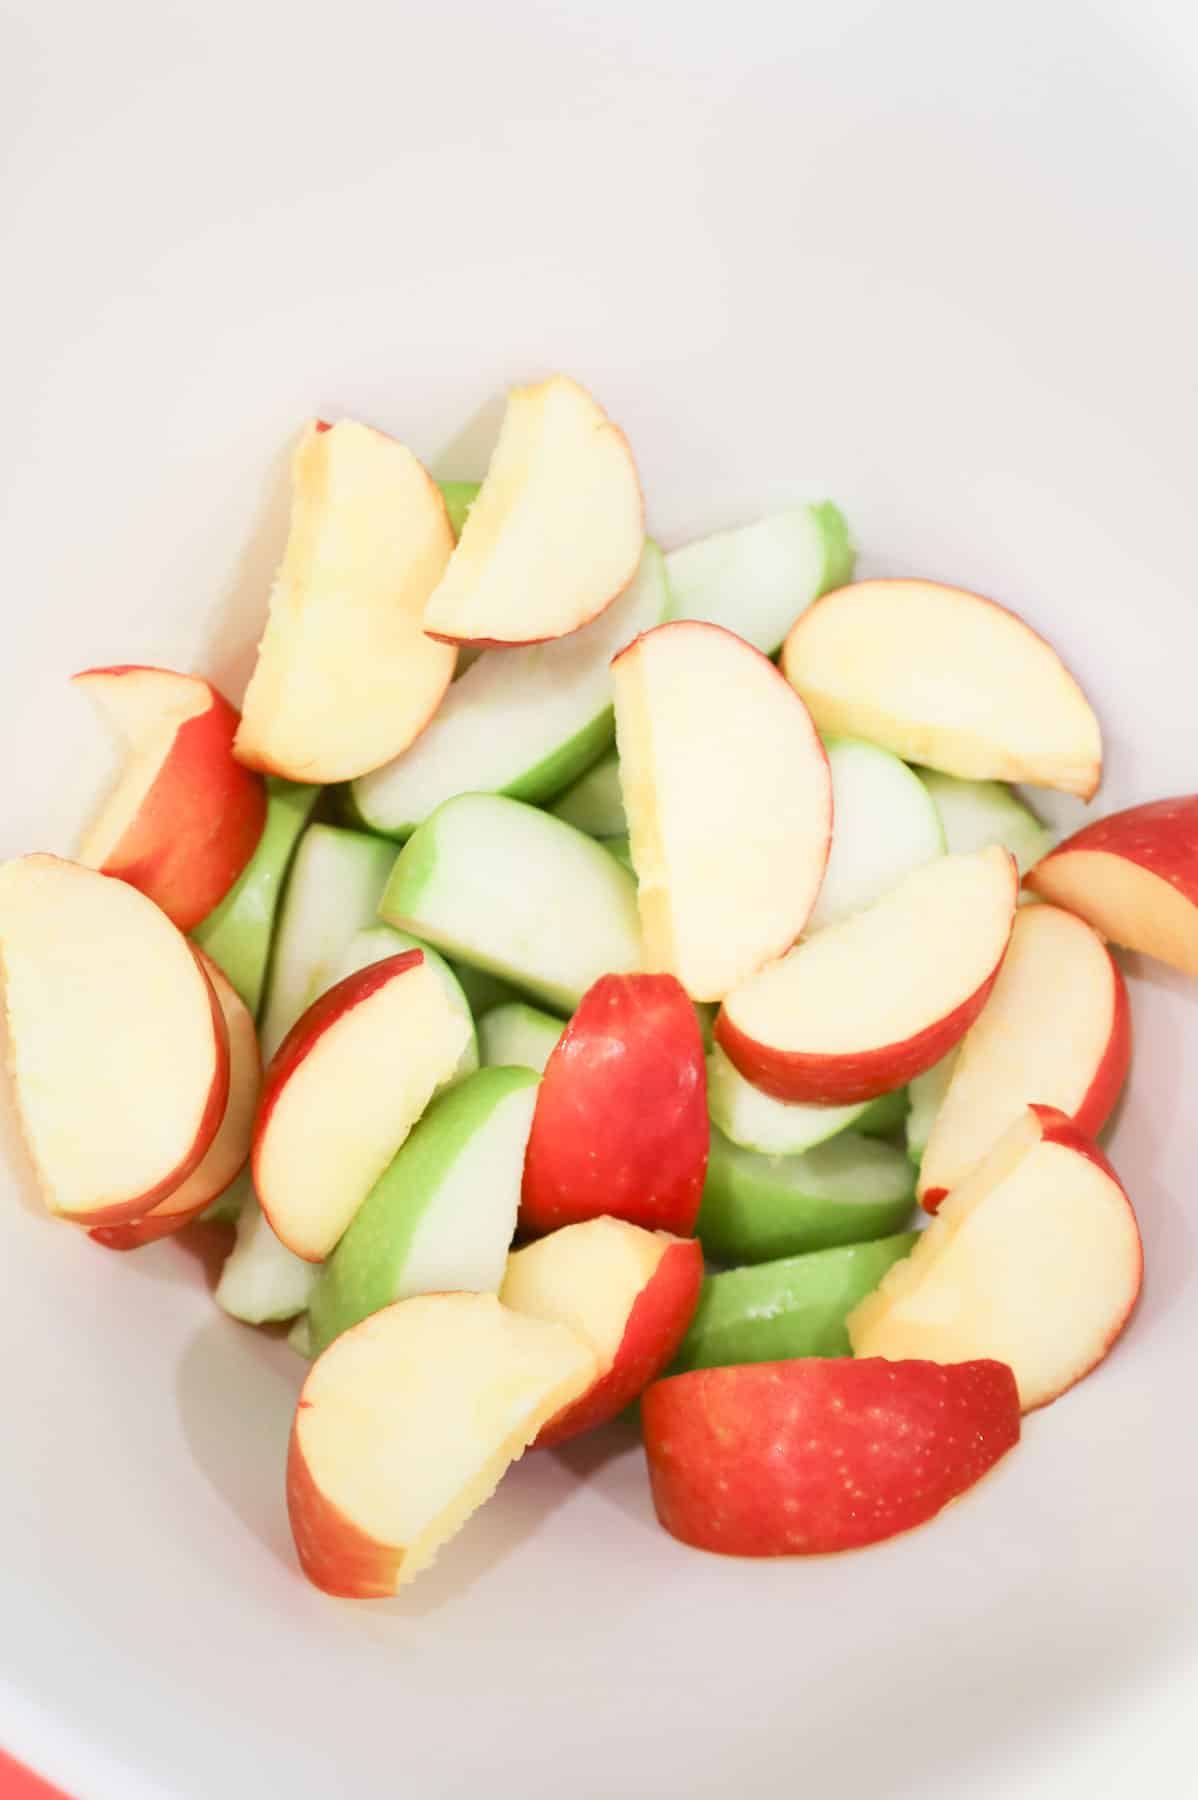 green and red apple slices in a bowl